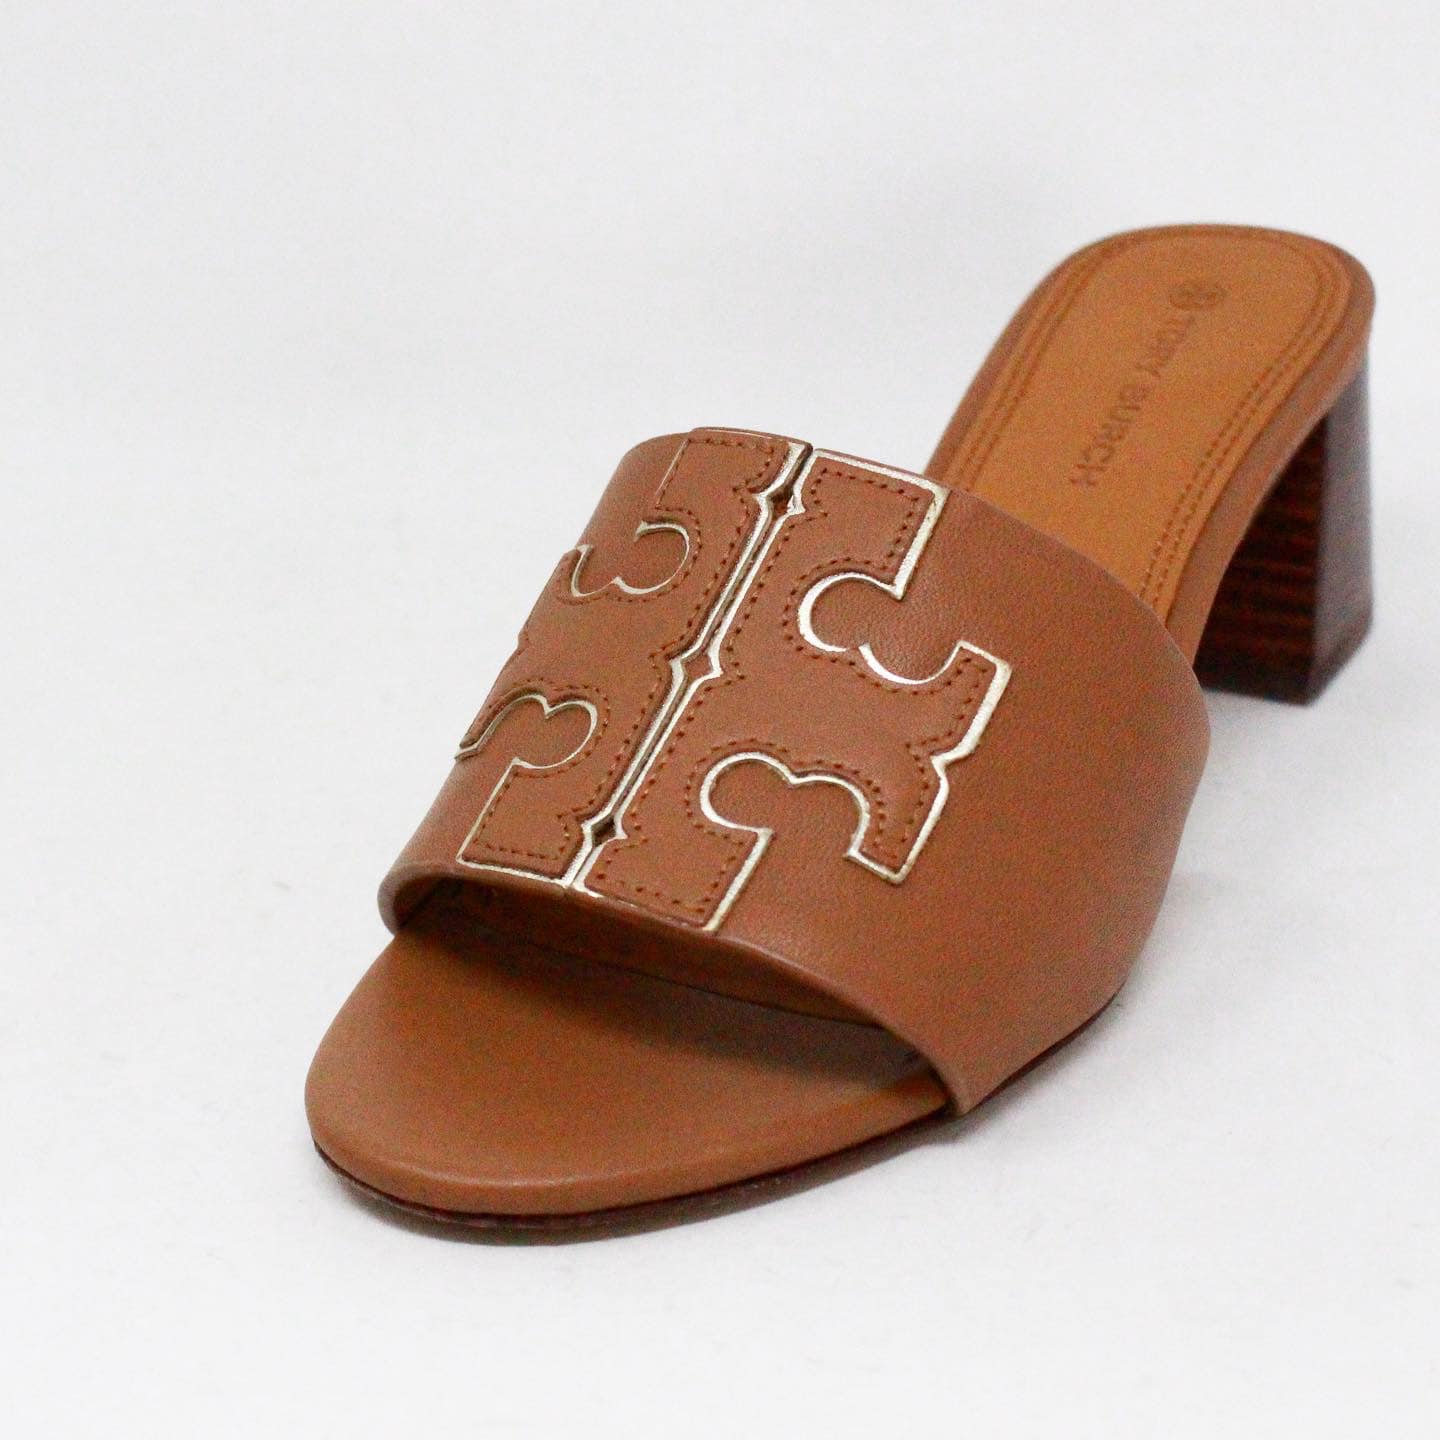 TORY BURCH #40210 Tan Calf Leather Ines Slides (US 7 EU 37) – ALL YOUR BLISS